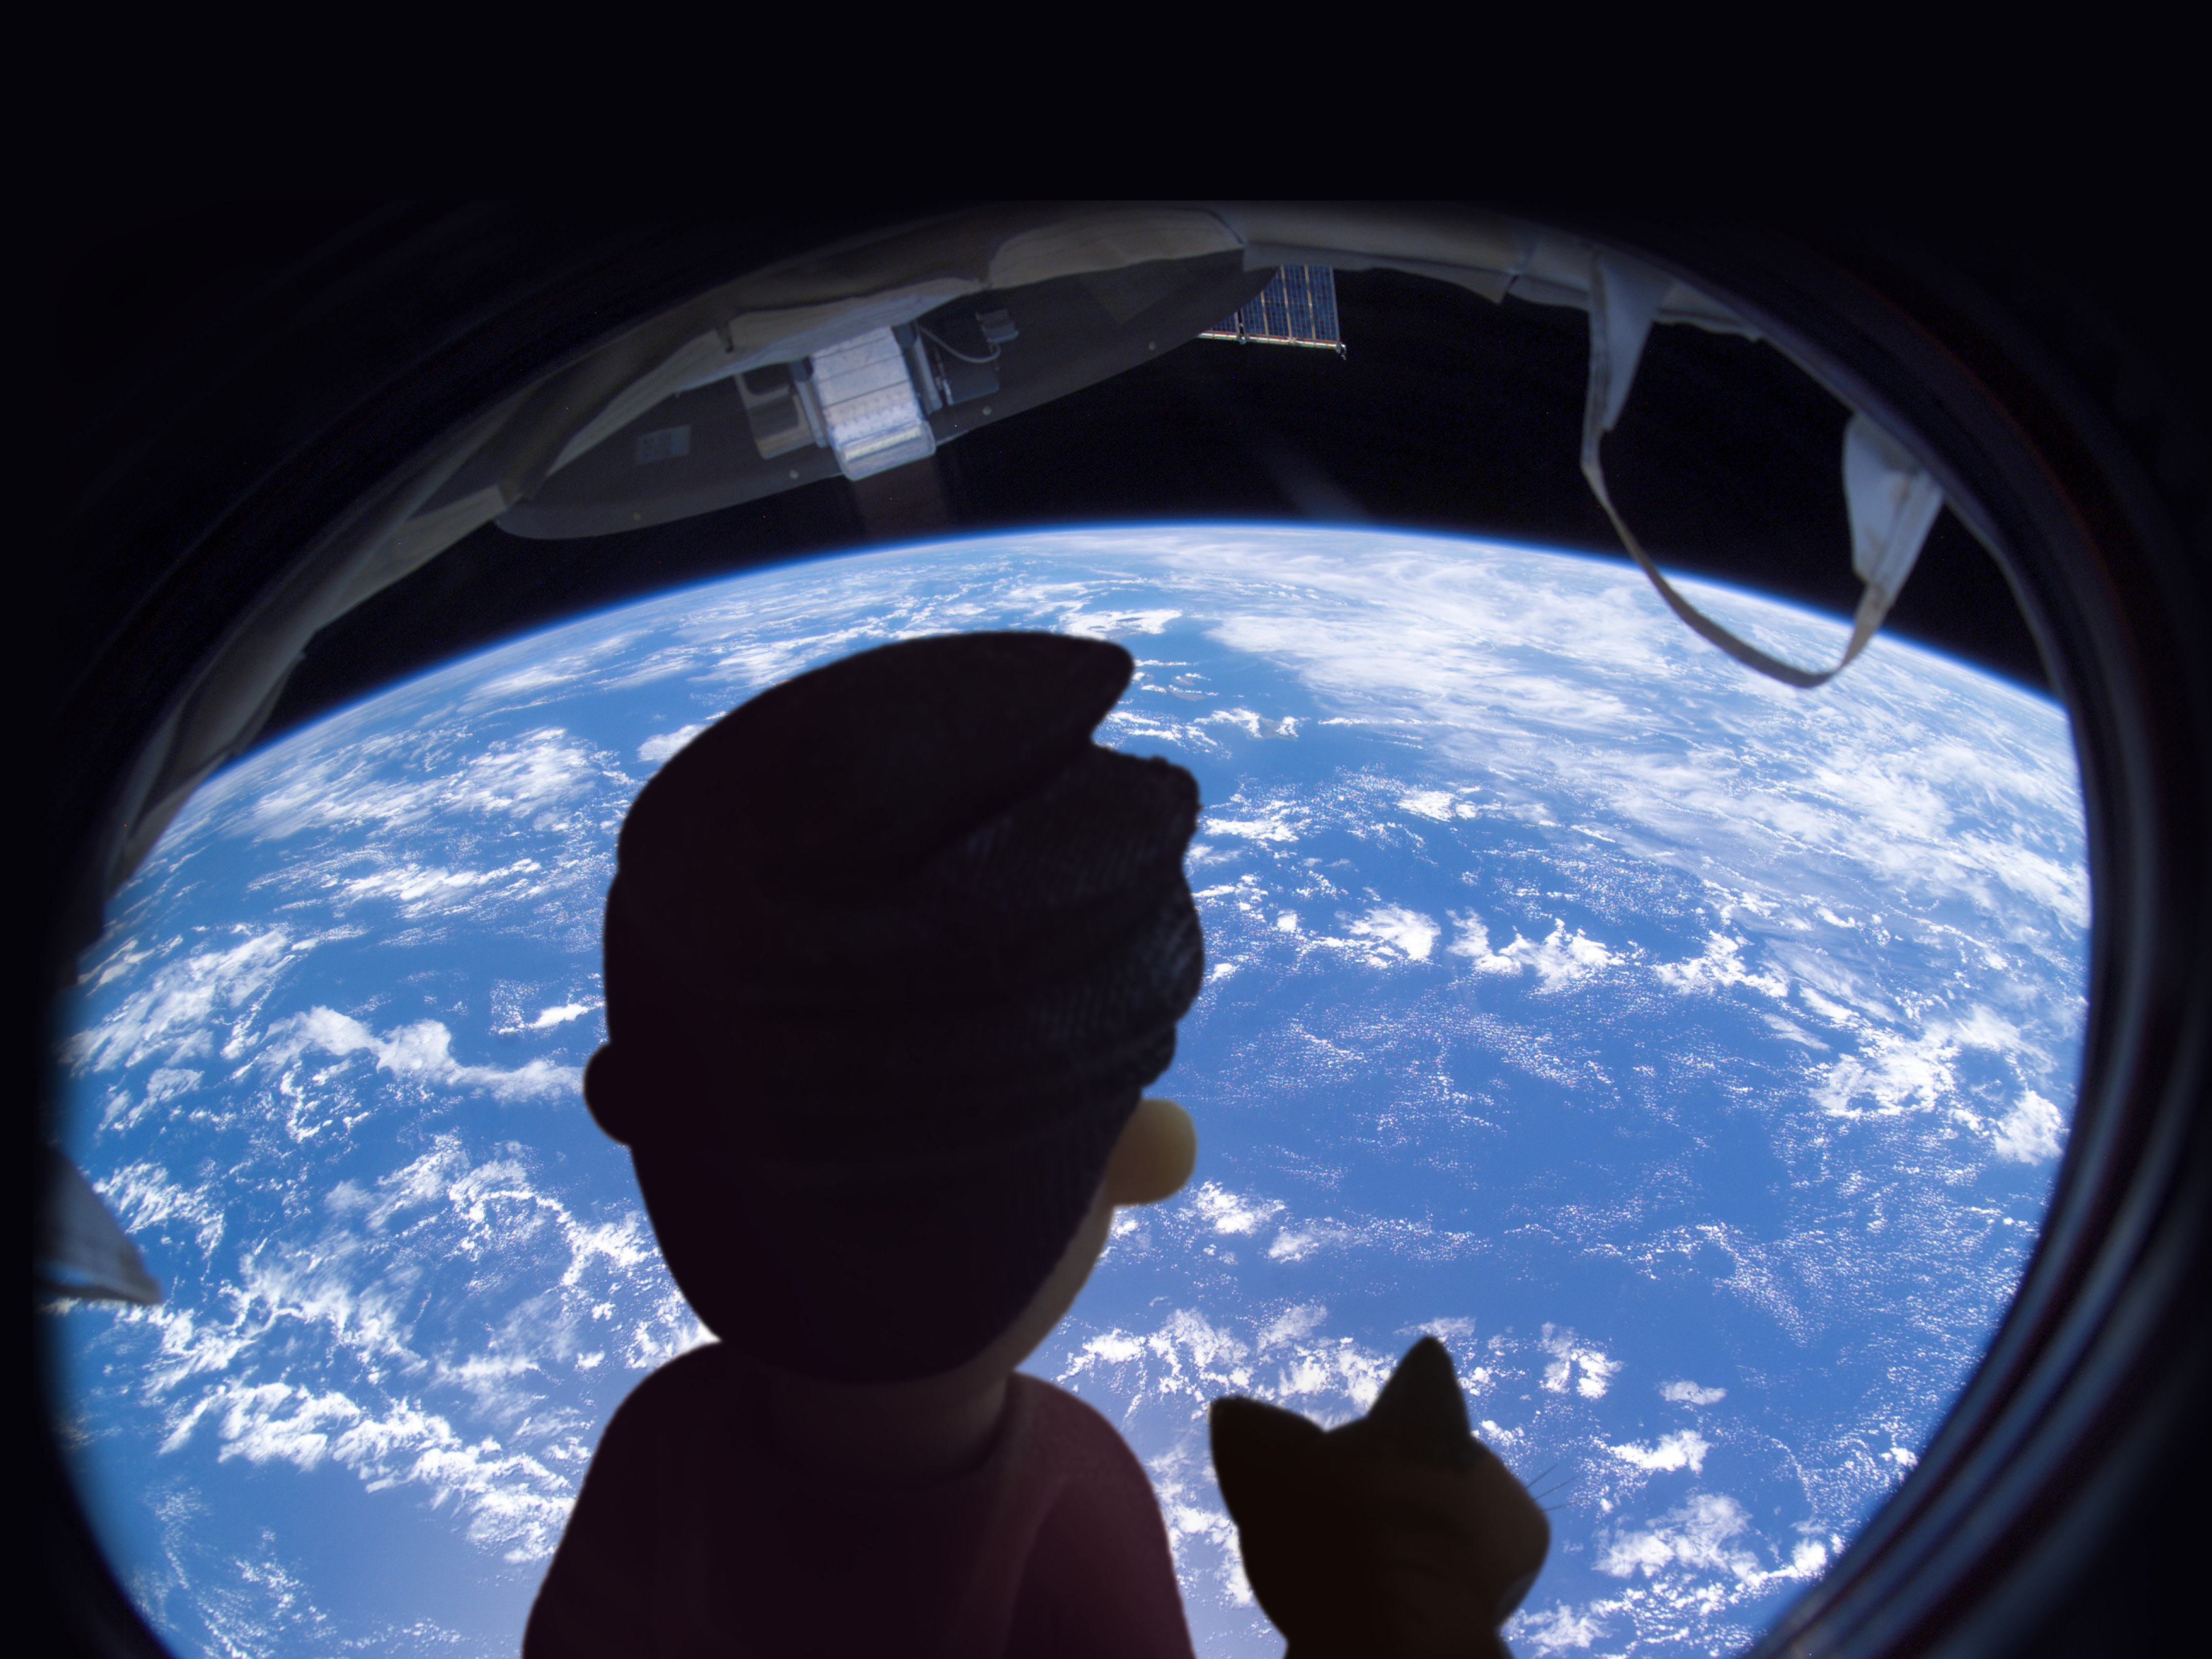 Little James and MiaKat look down at Earth from space